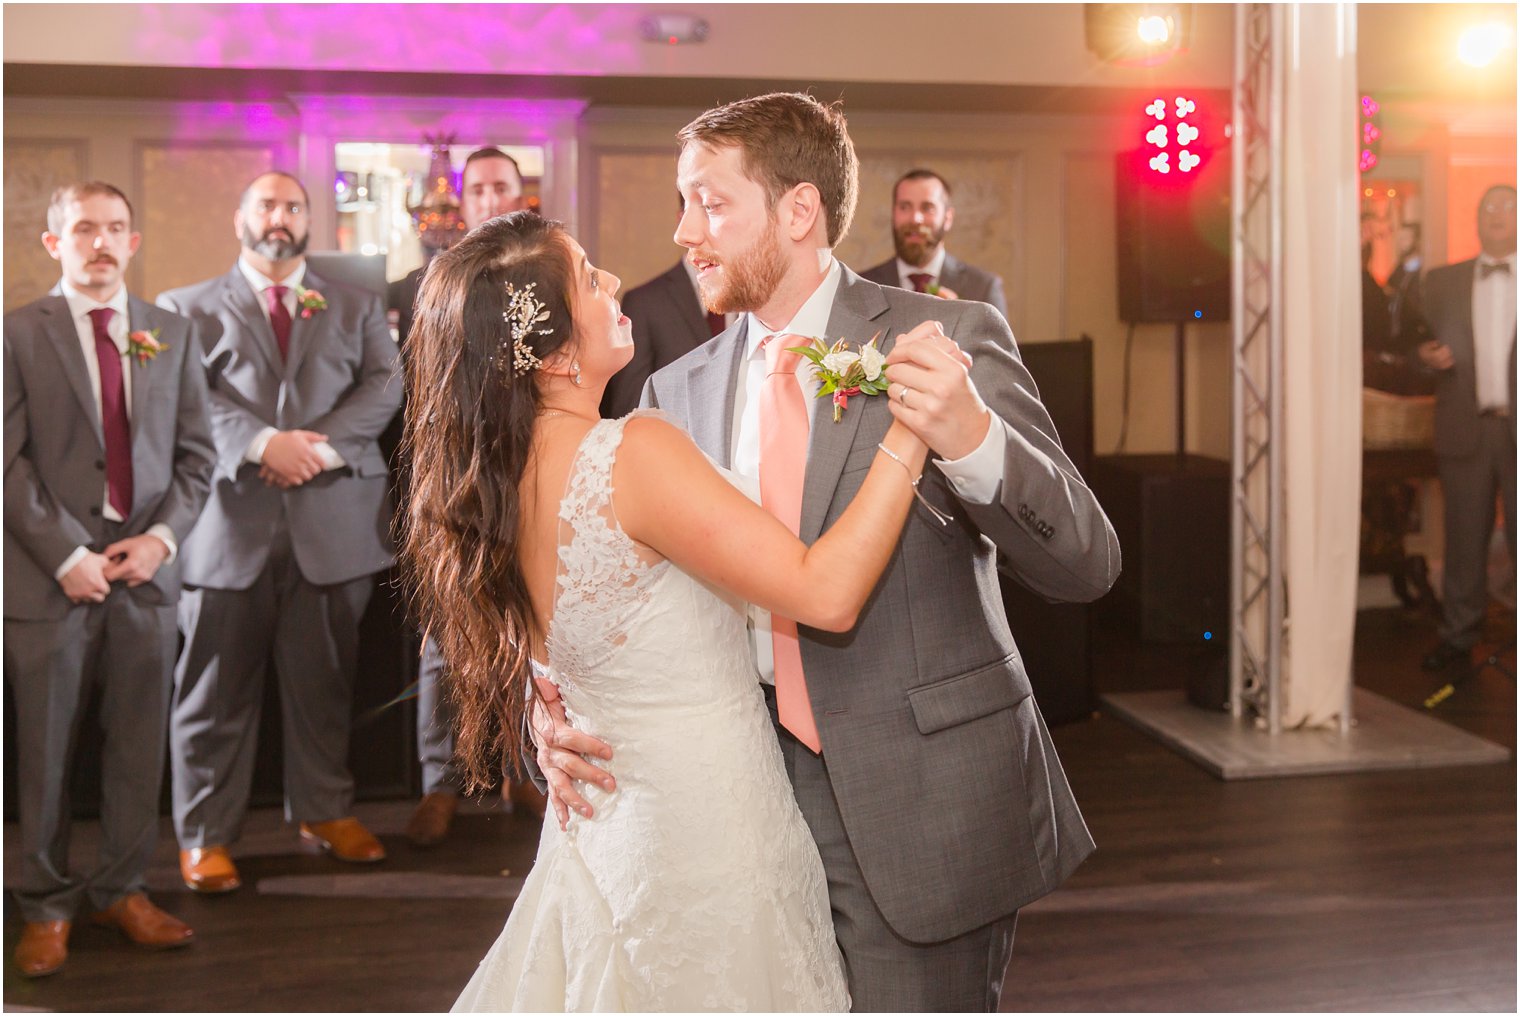 bride and groom dance during wedding reception at Olde Mill Inn photographed by Idalia Photography